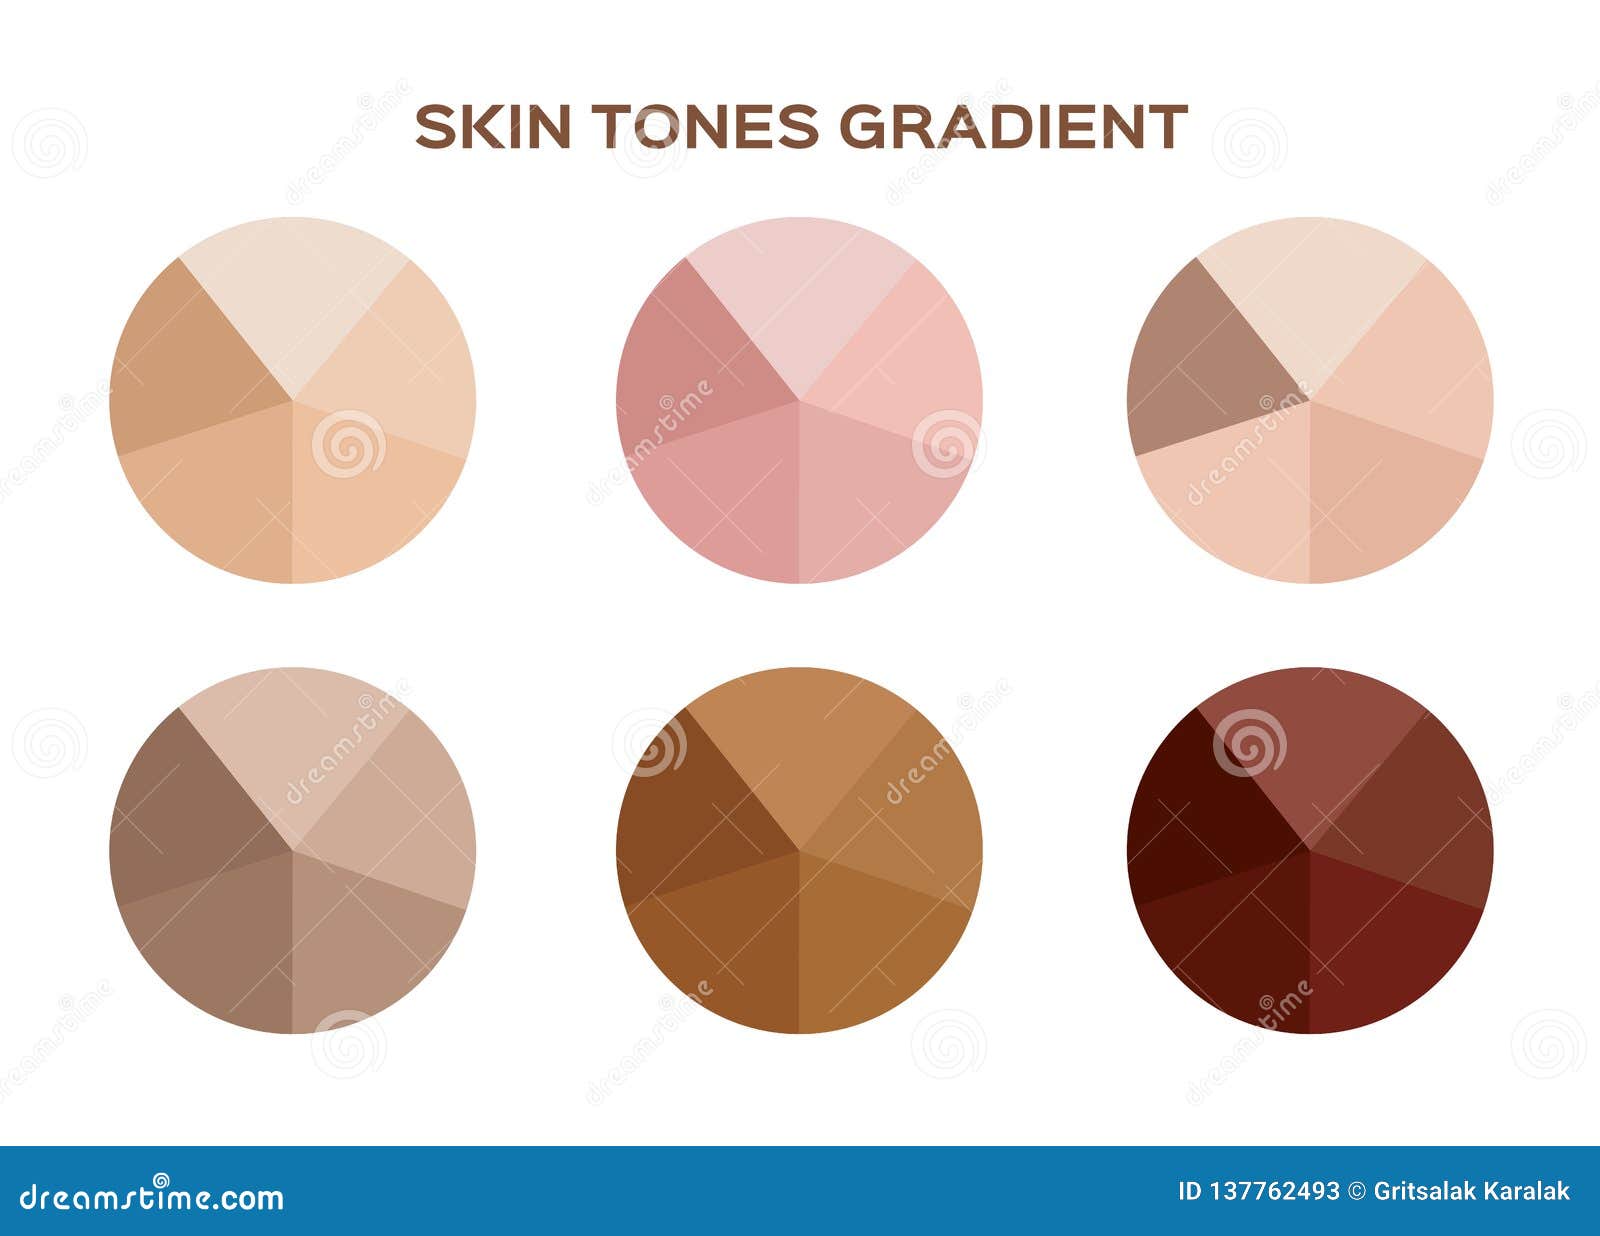 Skin Tones for Humans